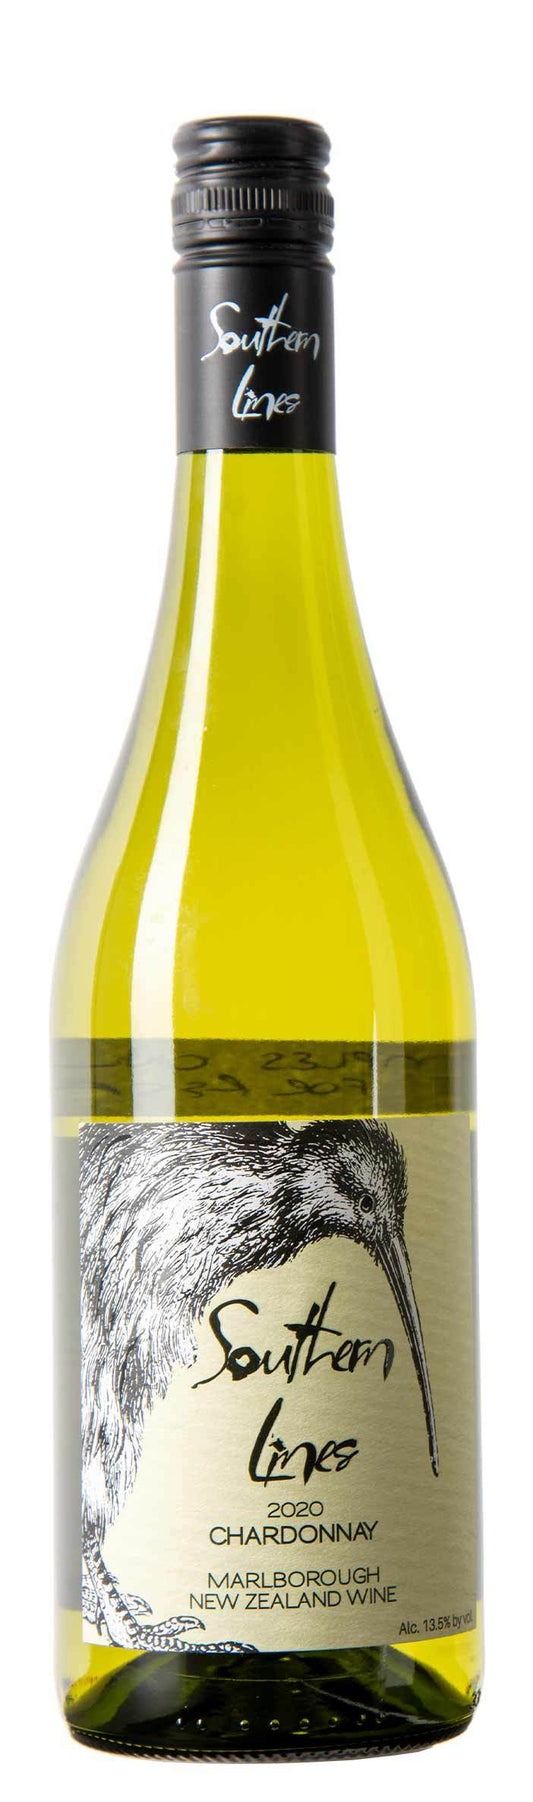 Southern Lines Chardonnay